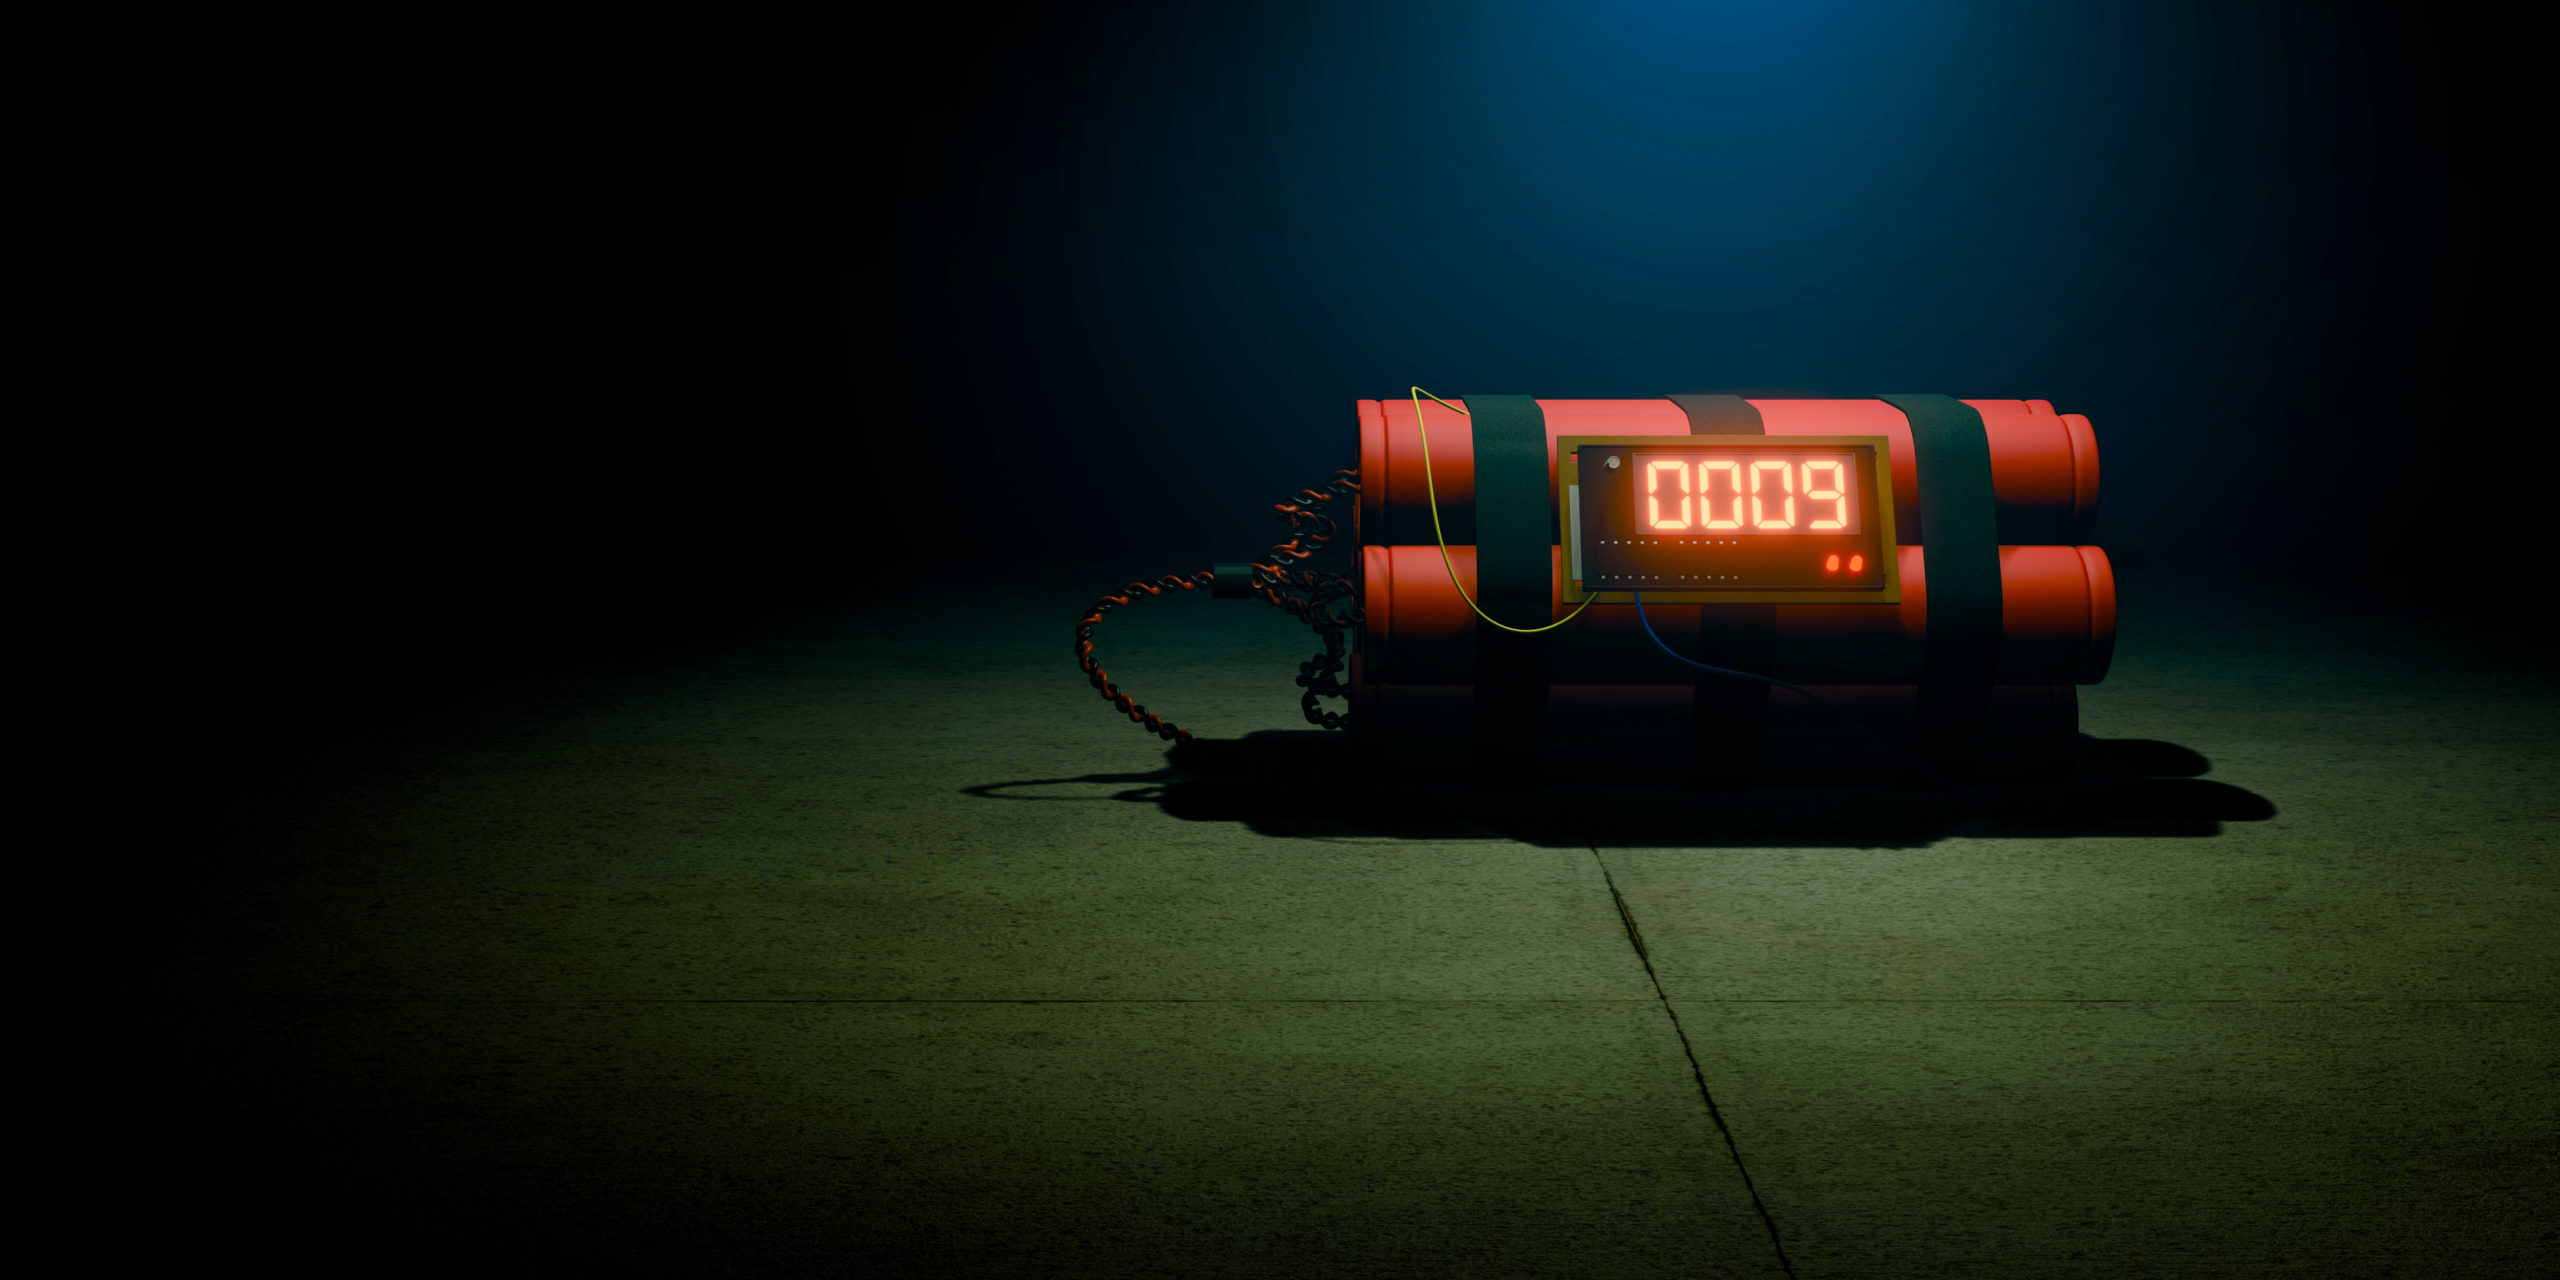 Image,Of,A,Time,Bomb,On,Dark,Background.,Timer,Counting.